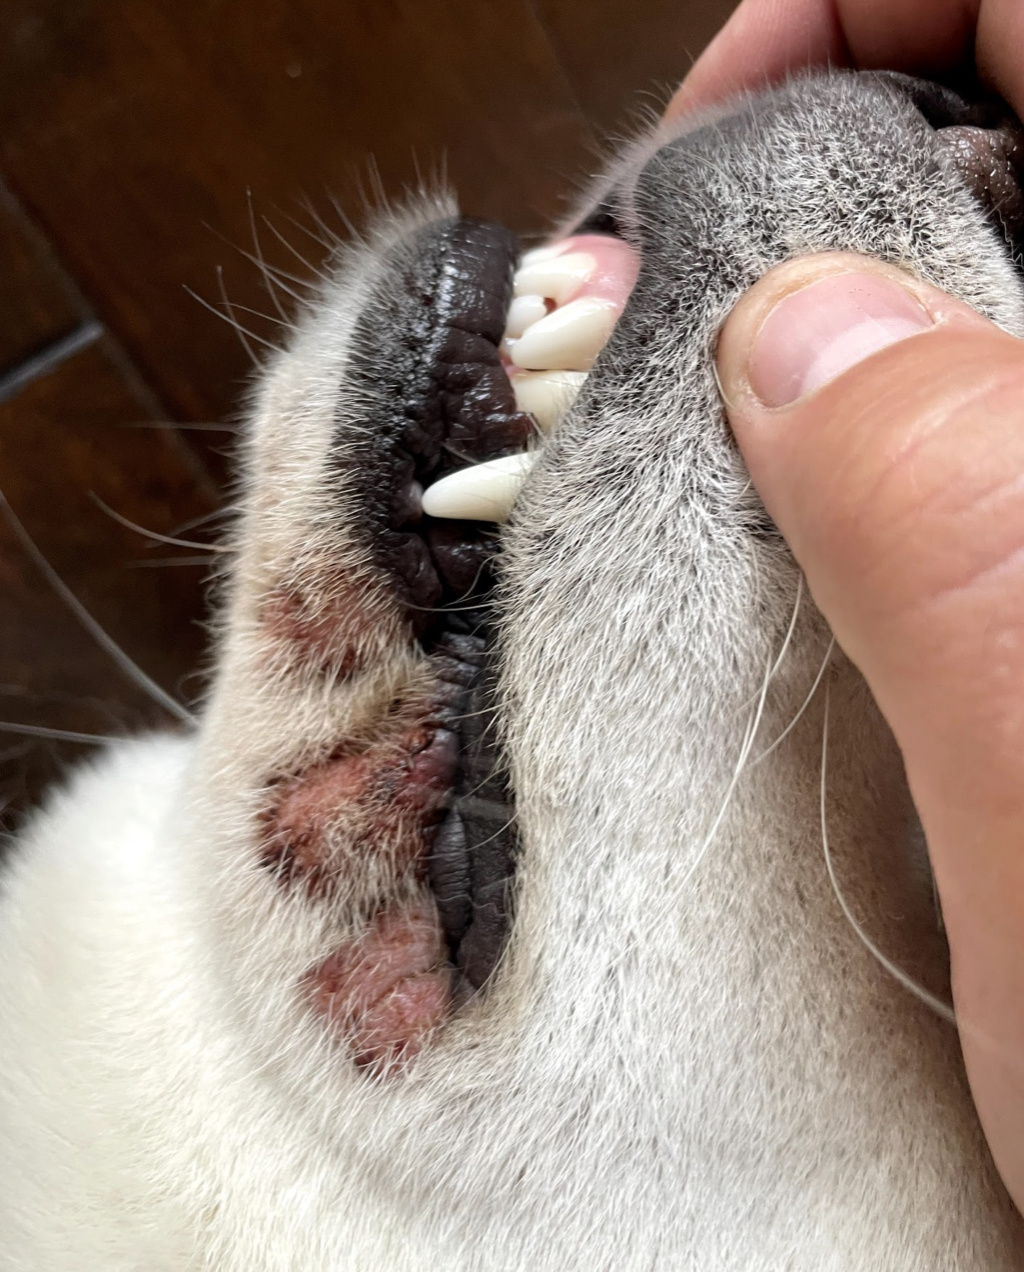 Husky - 2 year old Husky has mouth sores and patch on leg Screen10